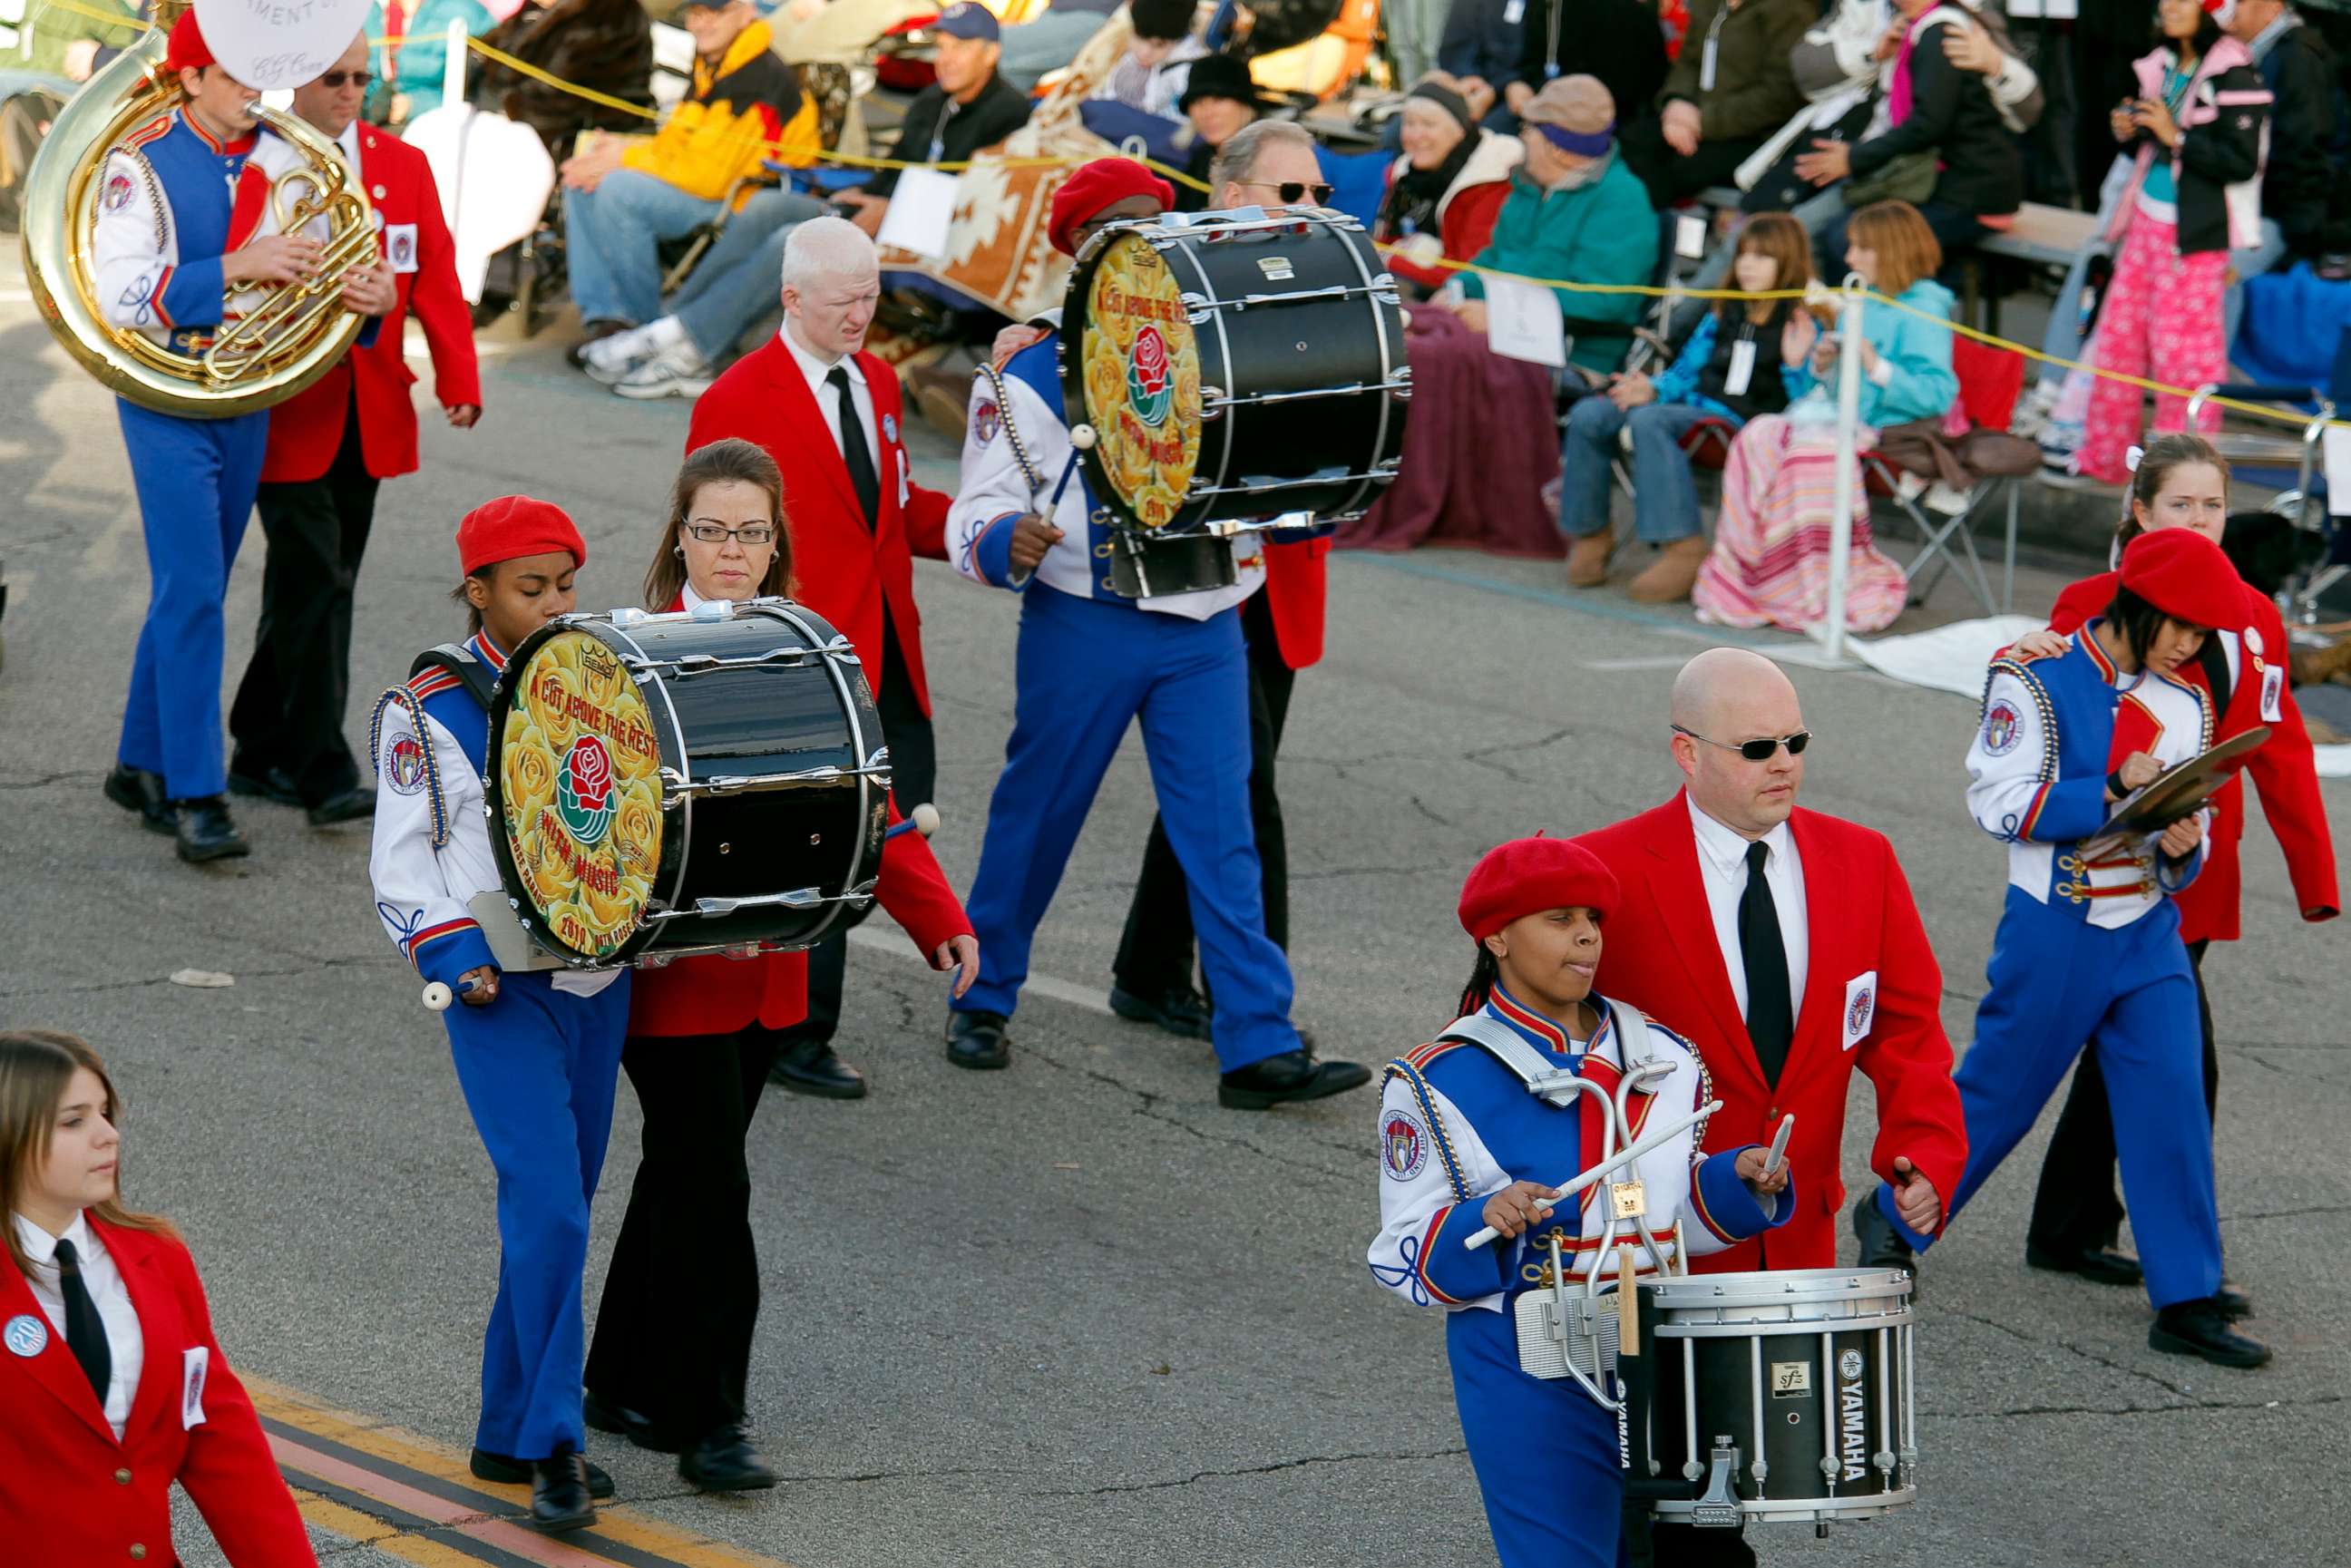 PHOTO: Ohio State School for the Blind Marching band led by guides moves along Colorado Blvd. during the 121st Rose Parade in Pasadena Calif., on Jan 1, 2010.